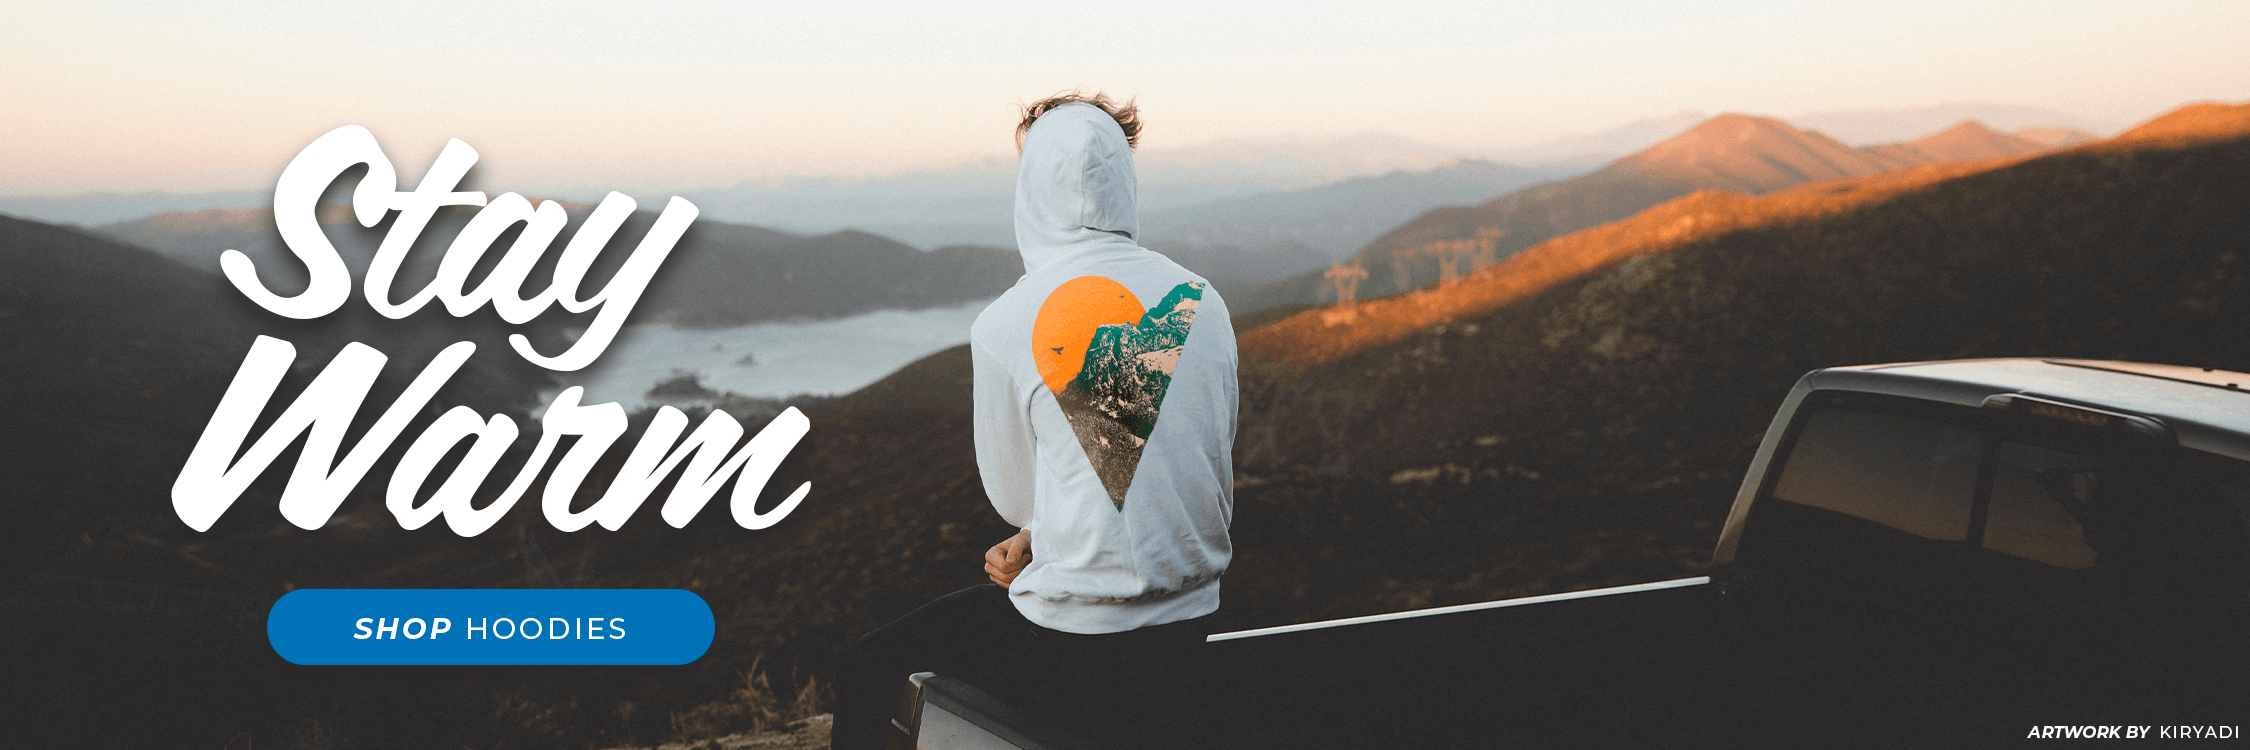 Stay Warm. Shop Hoodies. Graphic of man sitting on mountain.